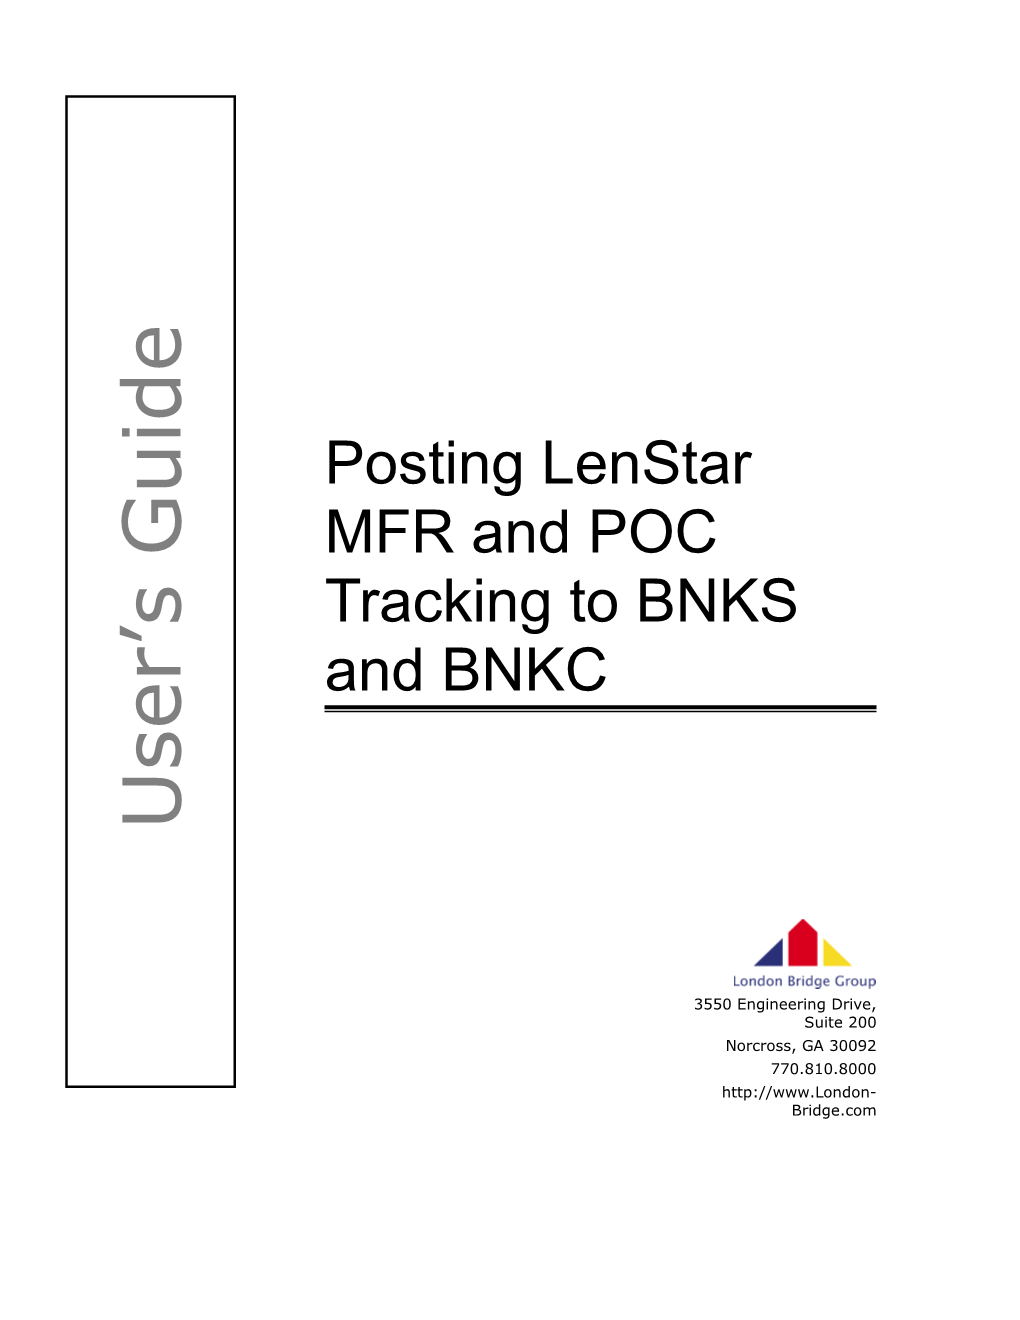 Posting Lenstar MFR and POC Tracking to BNKS and BNKC